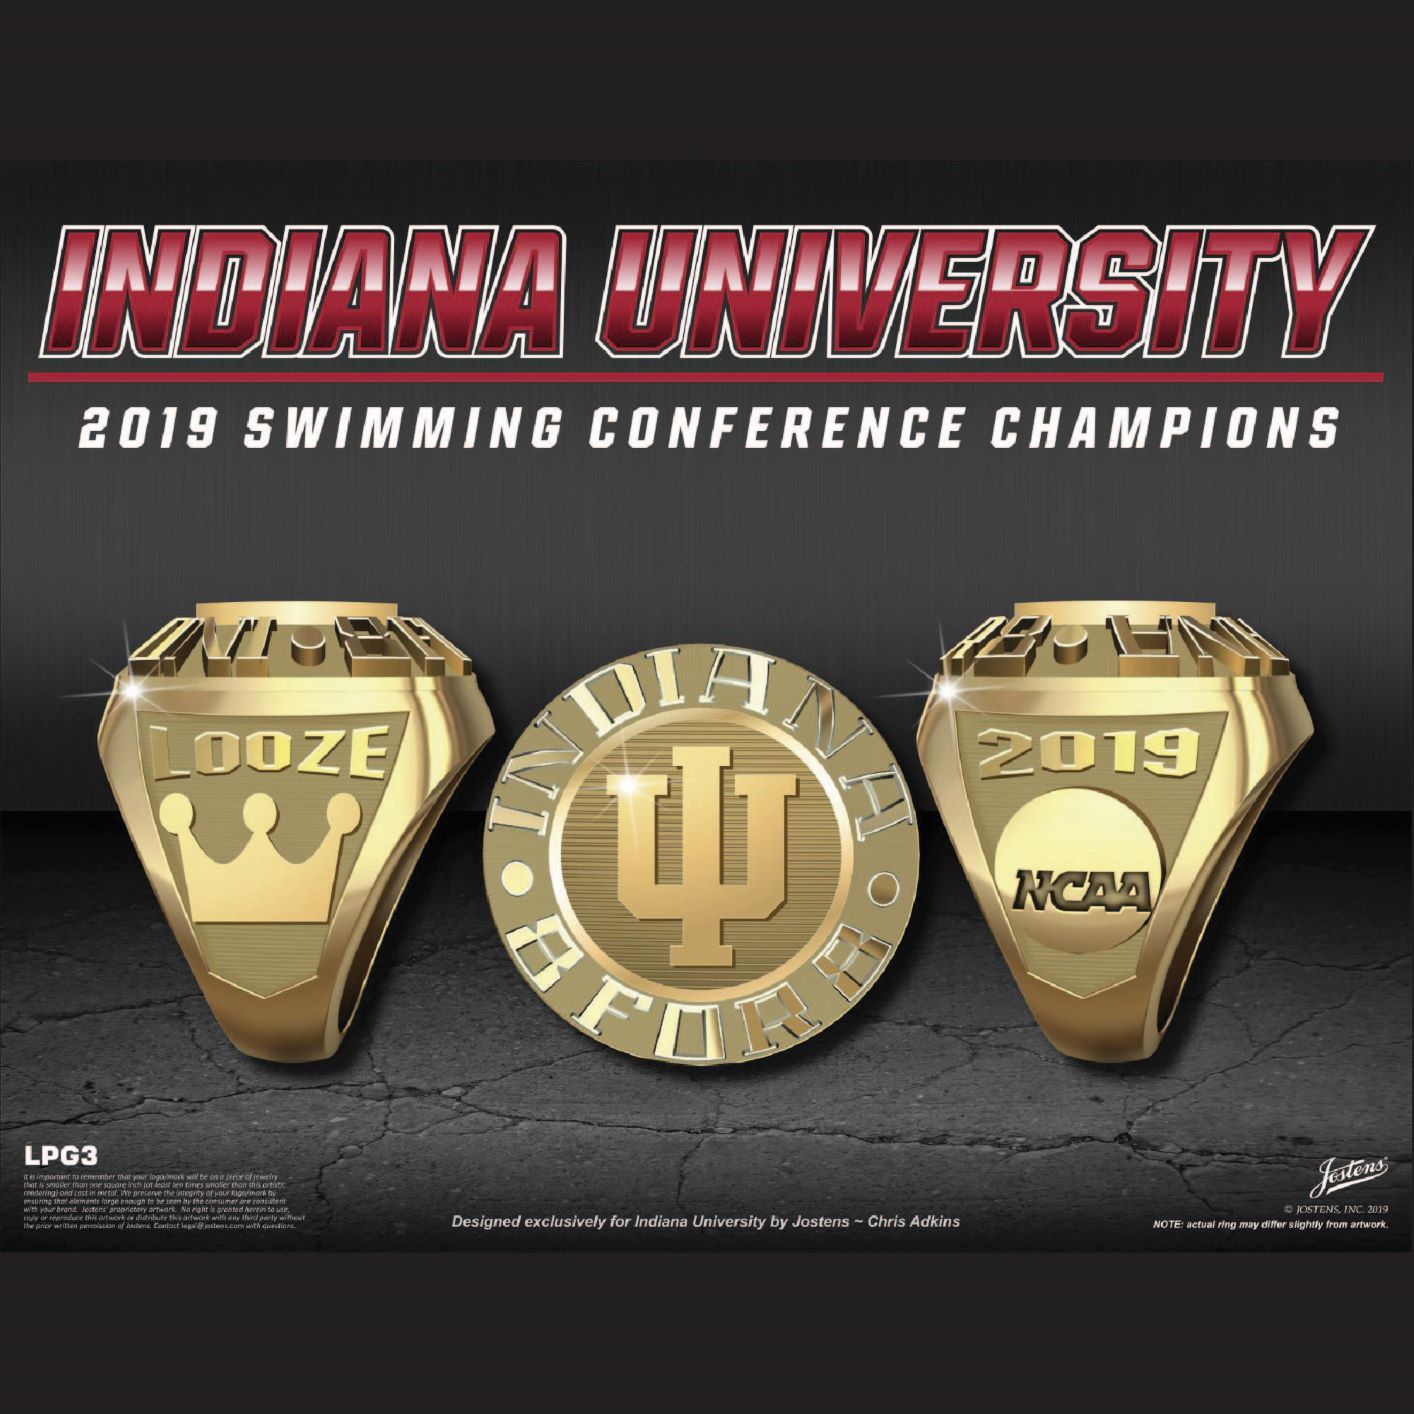 Indiana University Women's Swimming & Diving 2019 Conference Championship Ring